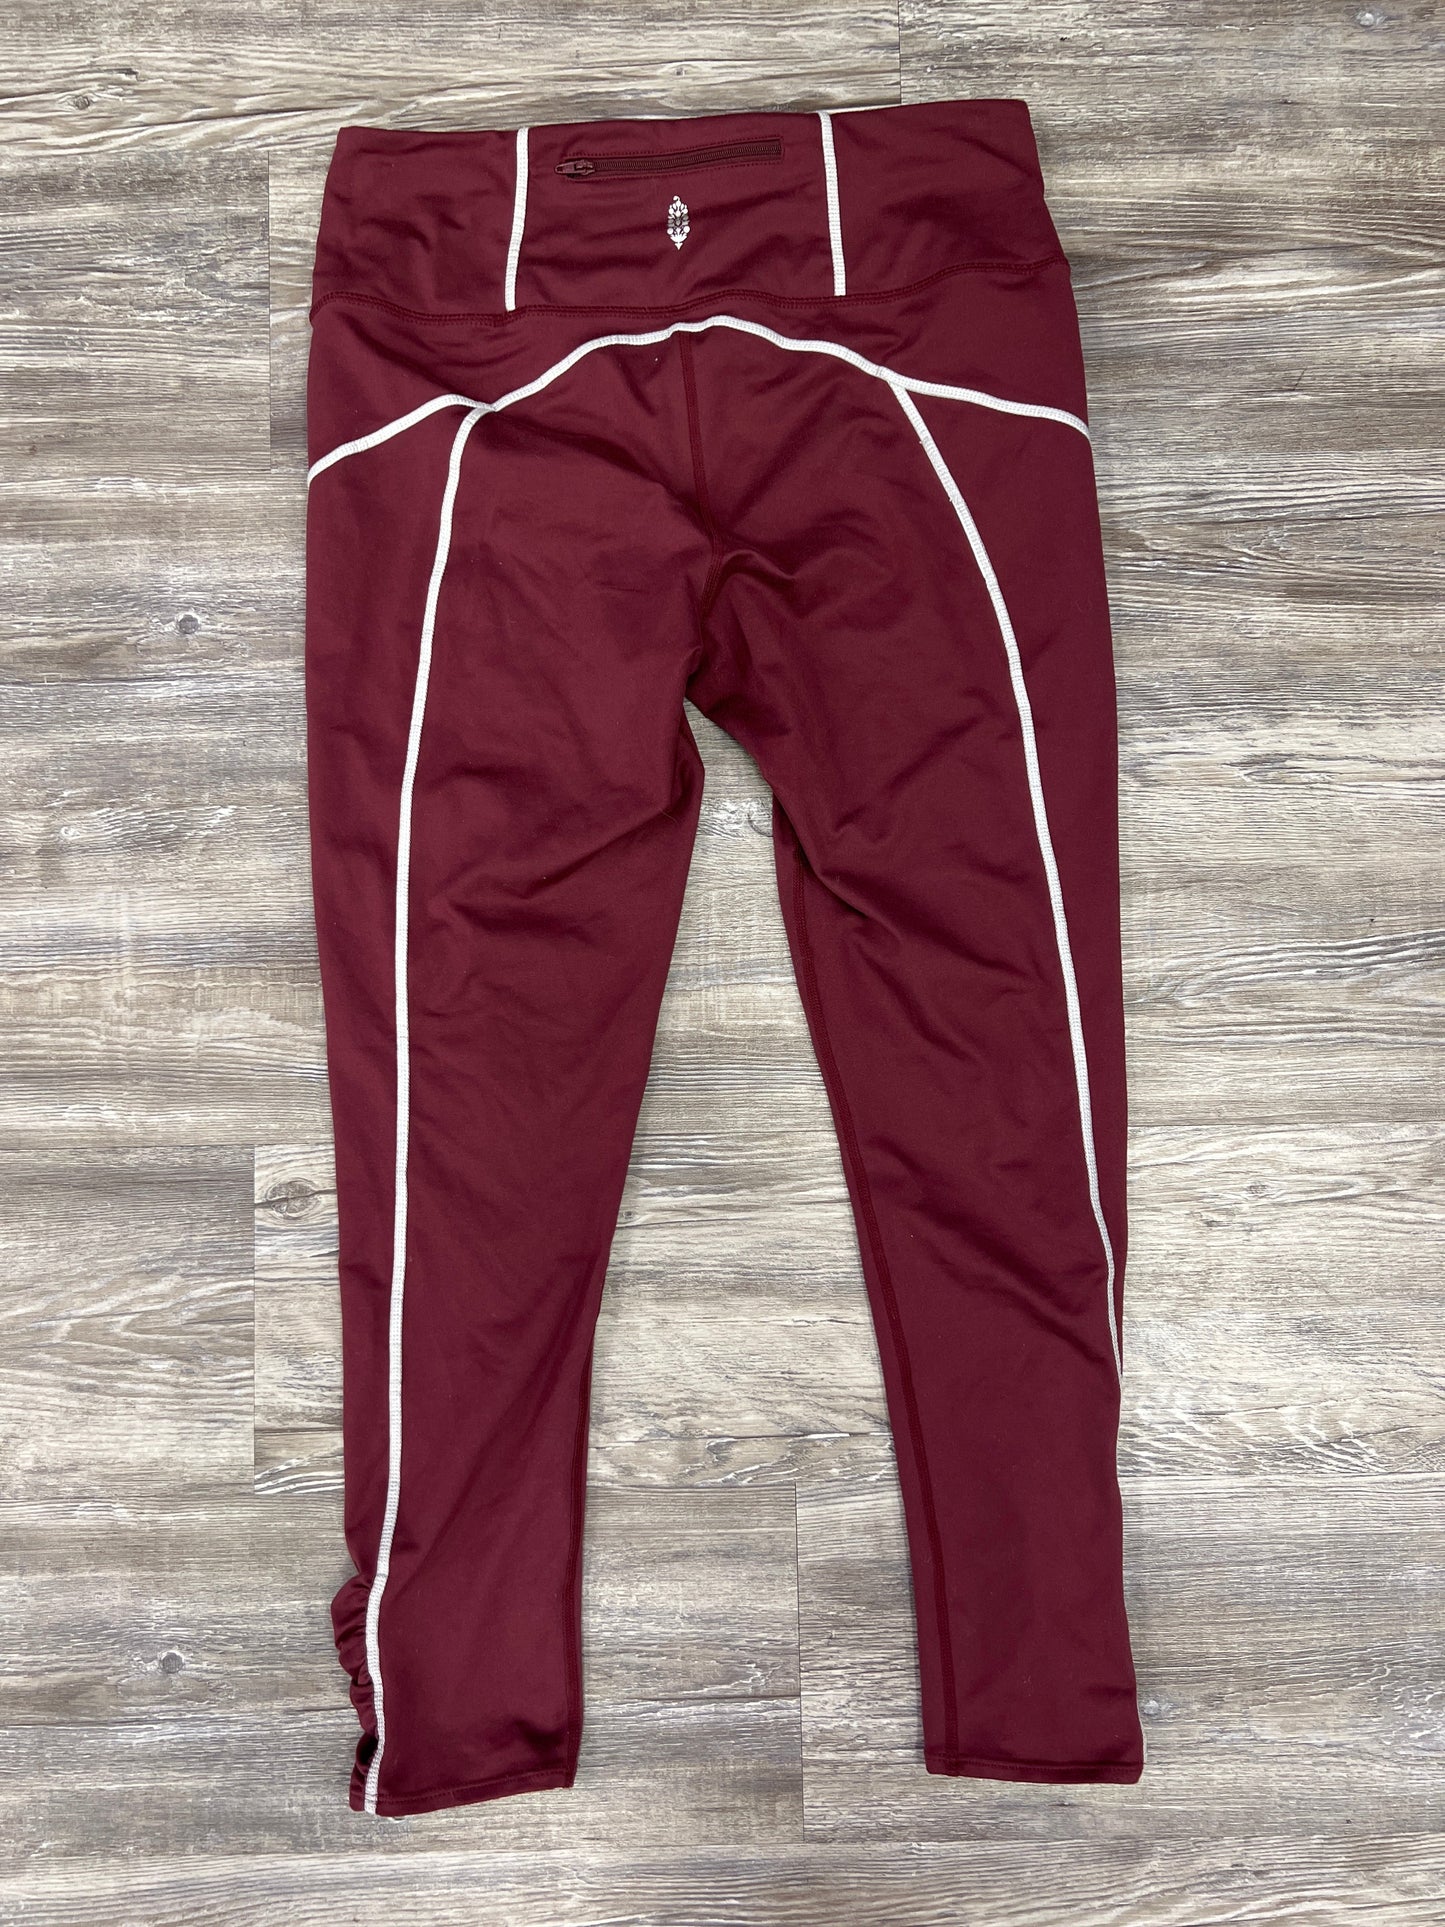 Athletic Leggings By Free People Size: L